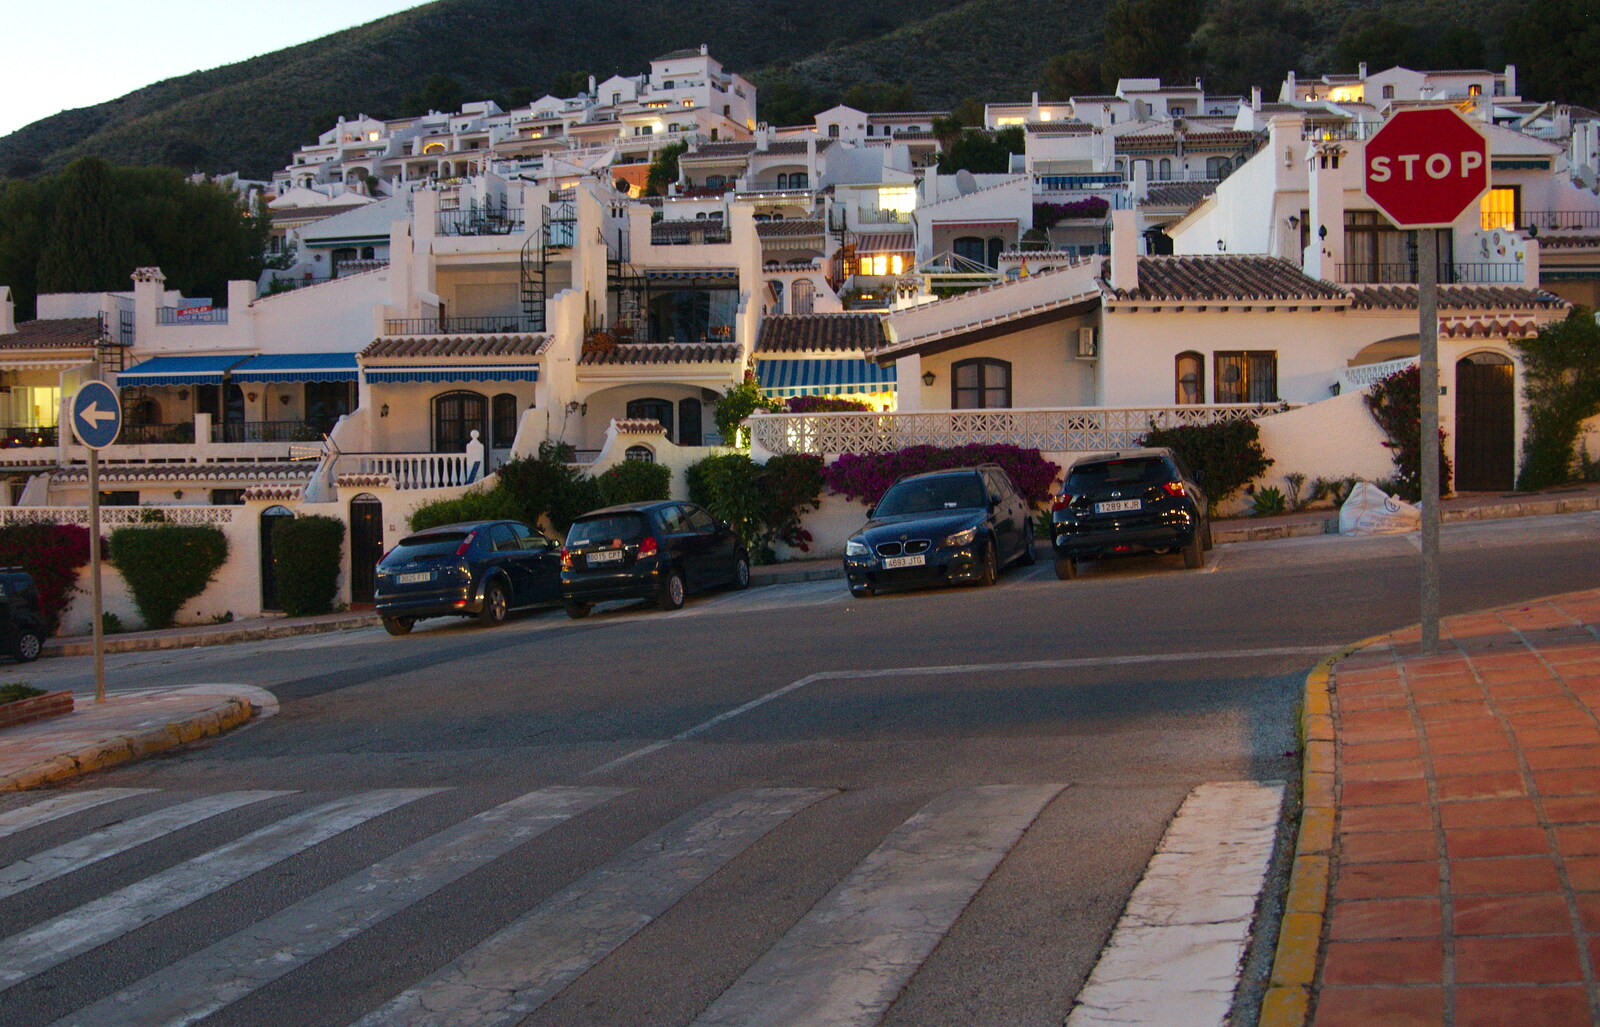 The apartment complex in the dusk from A Holiday in Nerja, Andalusia, Spain - 15th April 2019